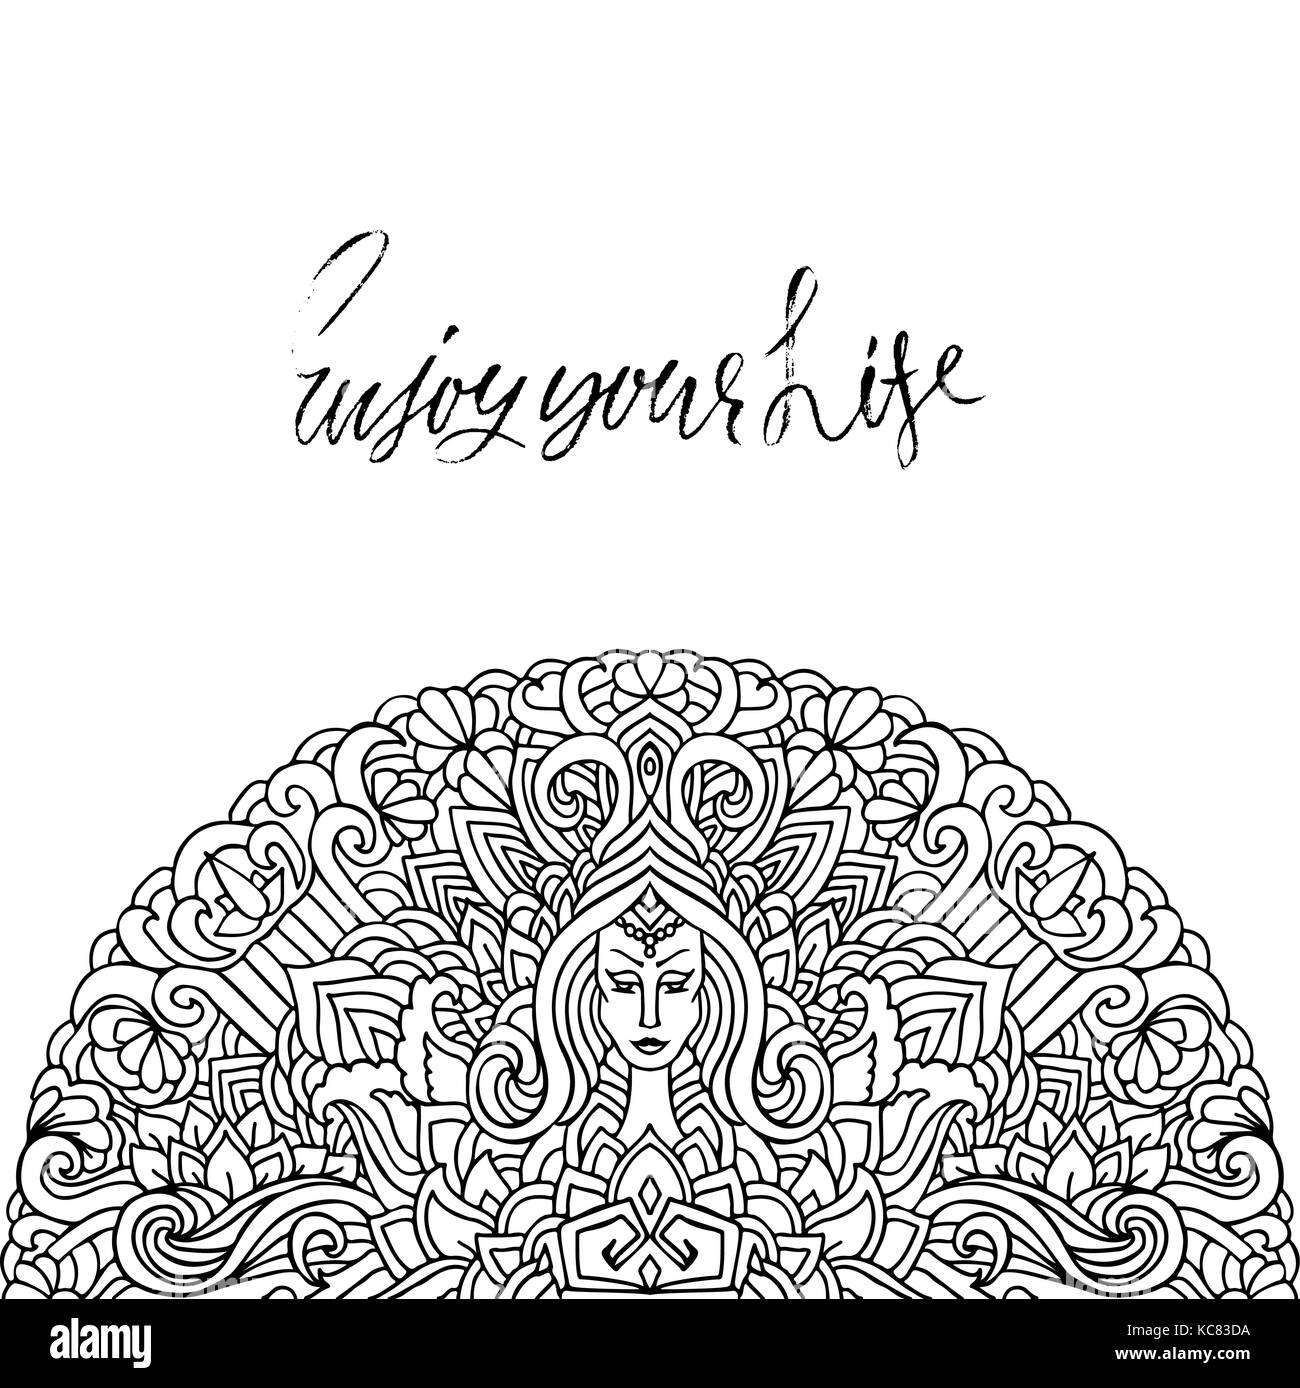 Hand lettered inspirational quote. Enjoy your life. Hand brushed ink lettering. Modern brush calligraphy. Abstract mandala ornament. Asian pattern.Vector illustration. Stock Vector